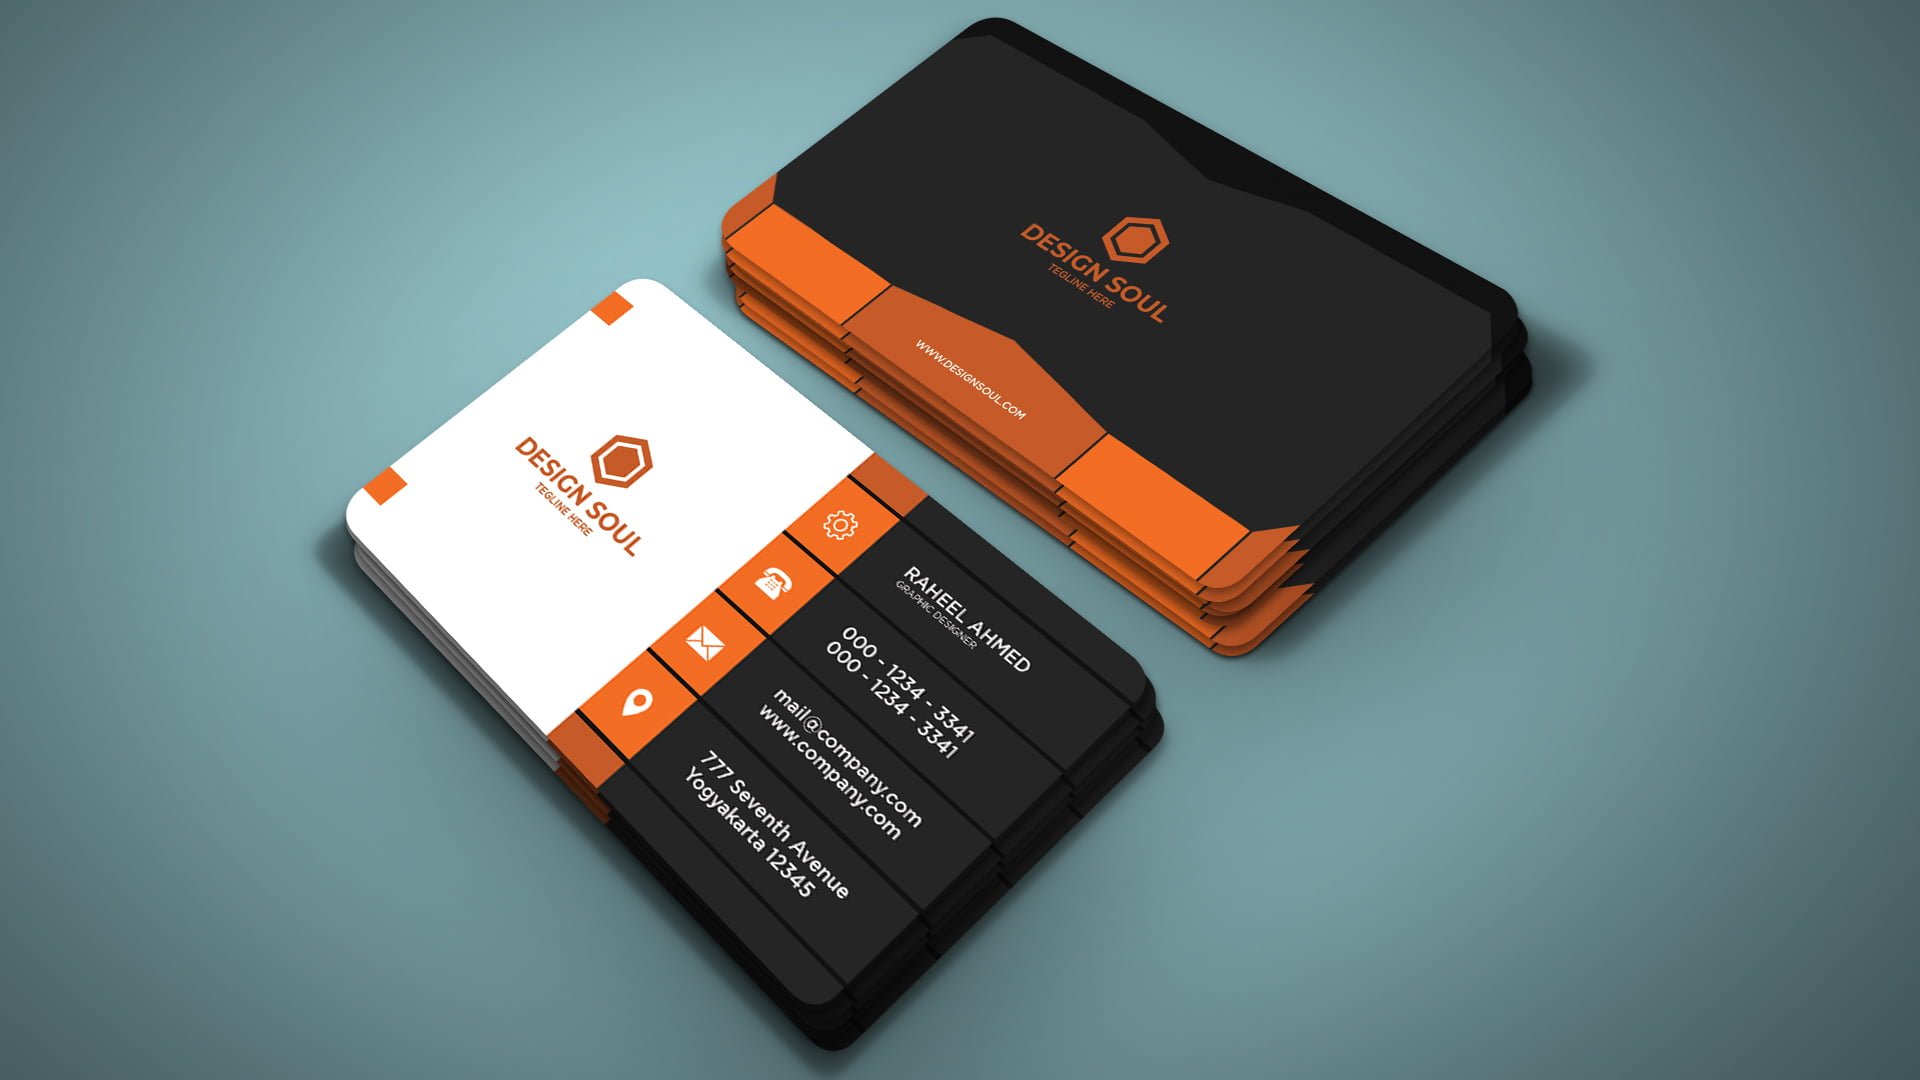 graphic designer personal business cards